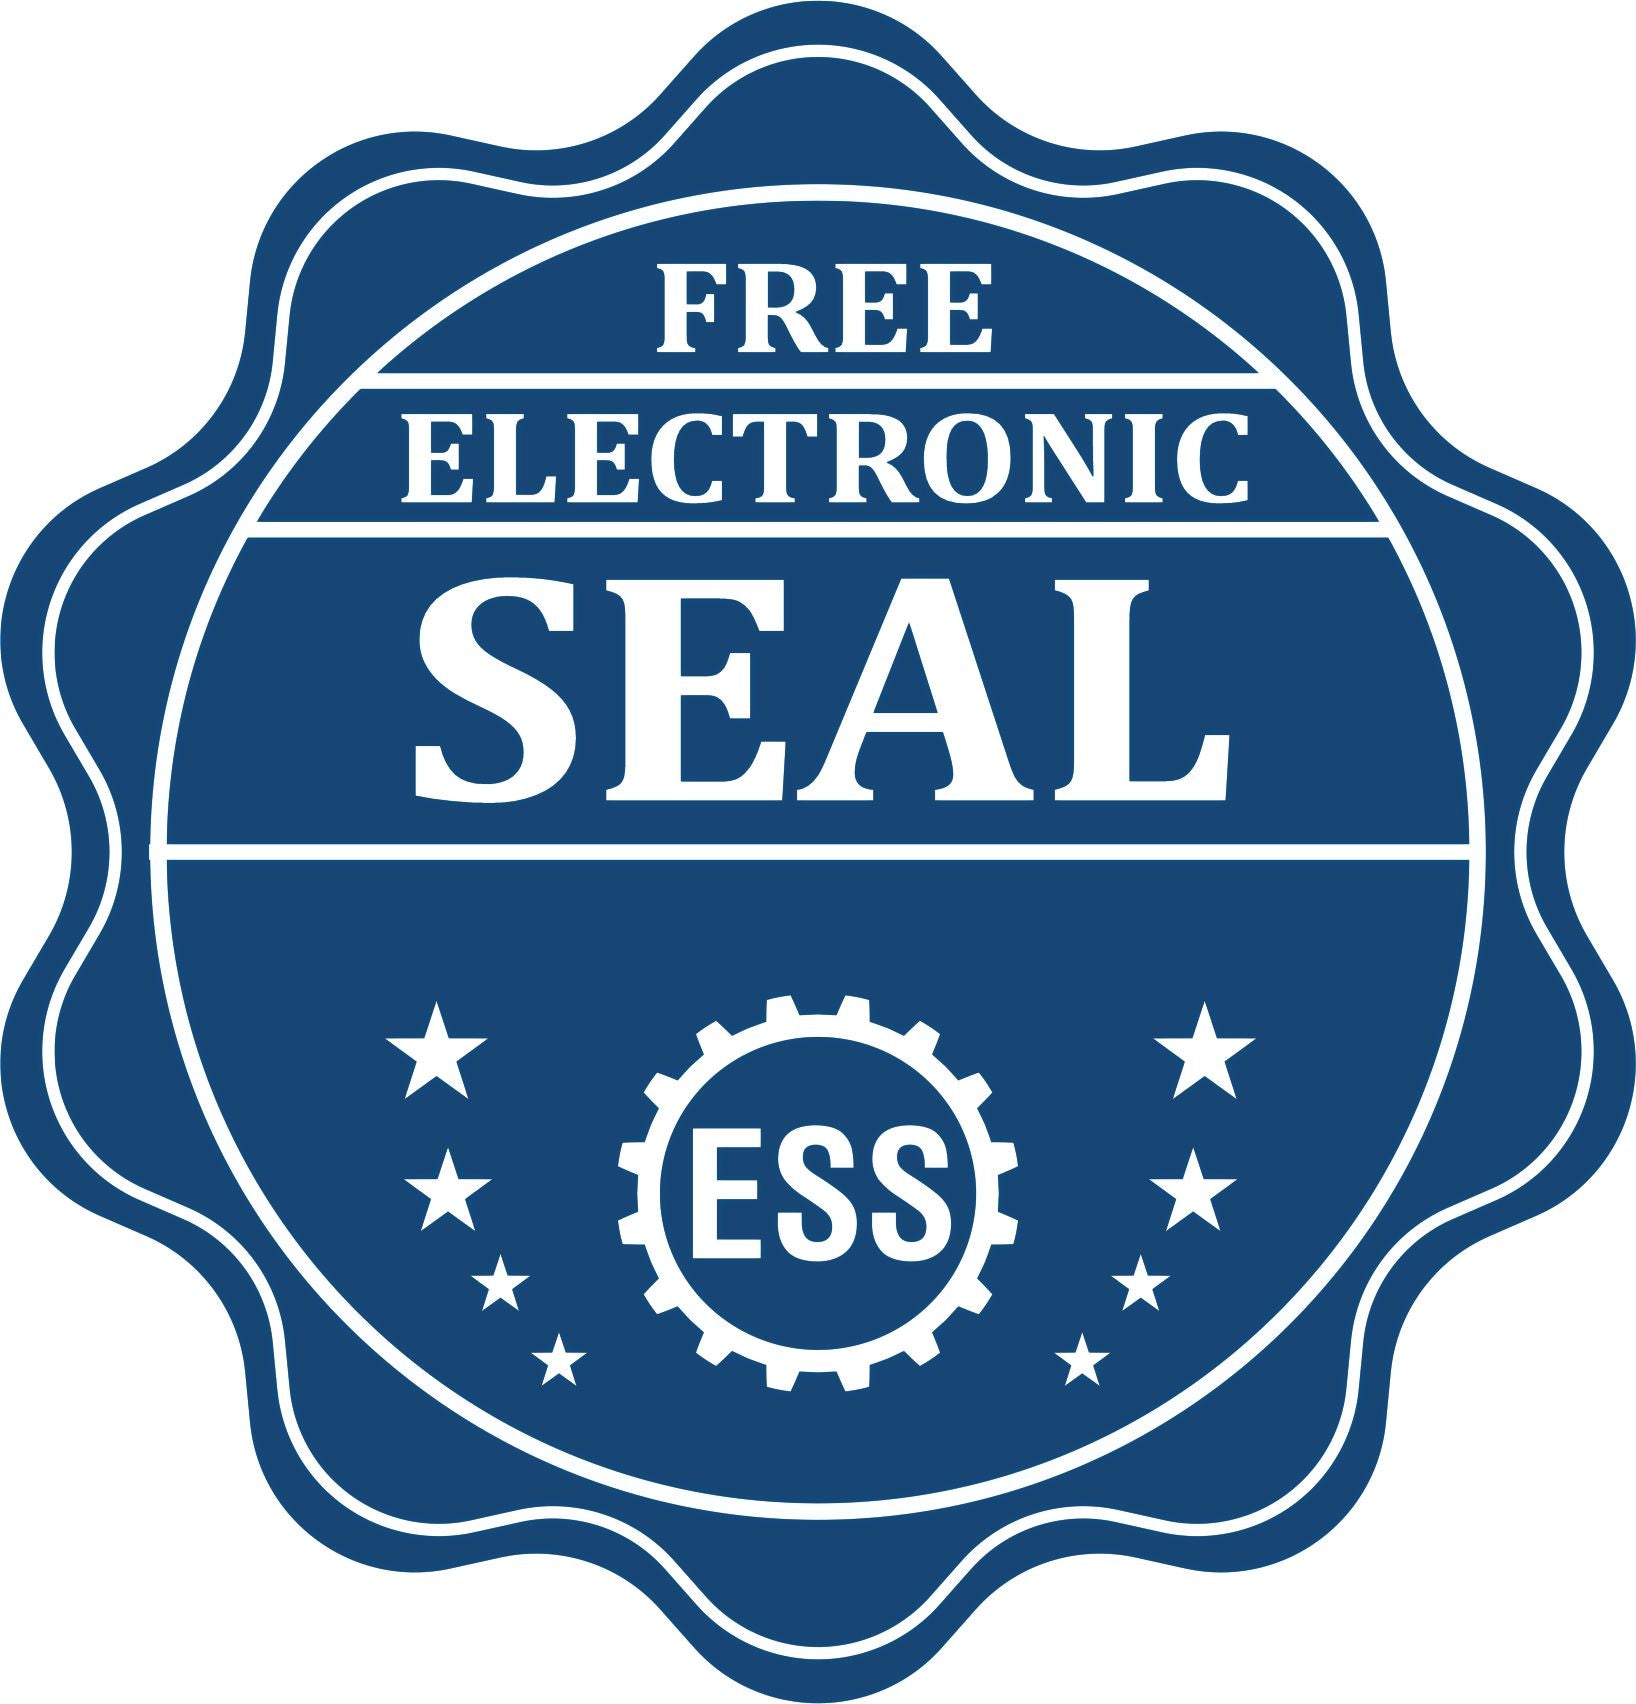 A badge showing a free electronic seal for the Puerto Rico Engineer Desk Seal with stars and the ESS gear on the emblem.